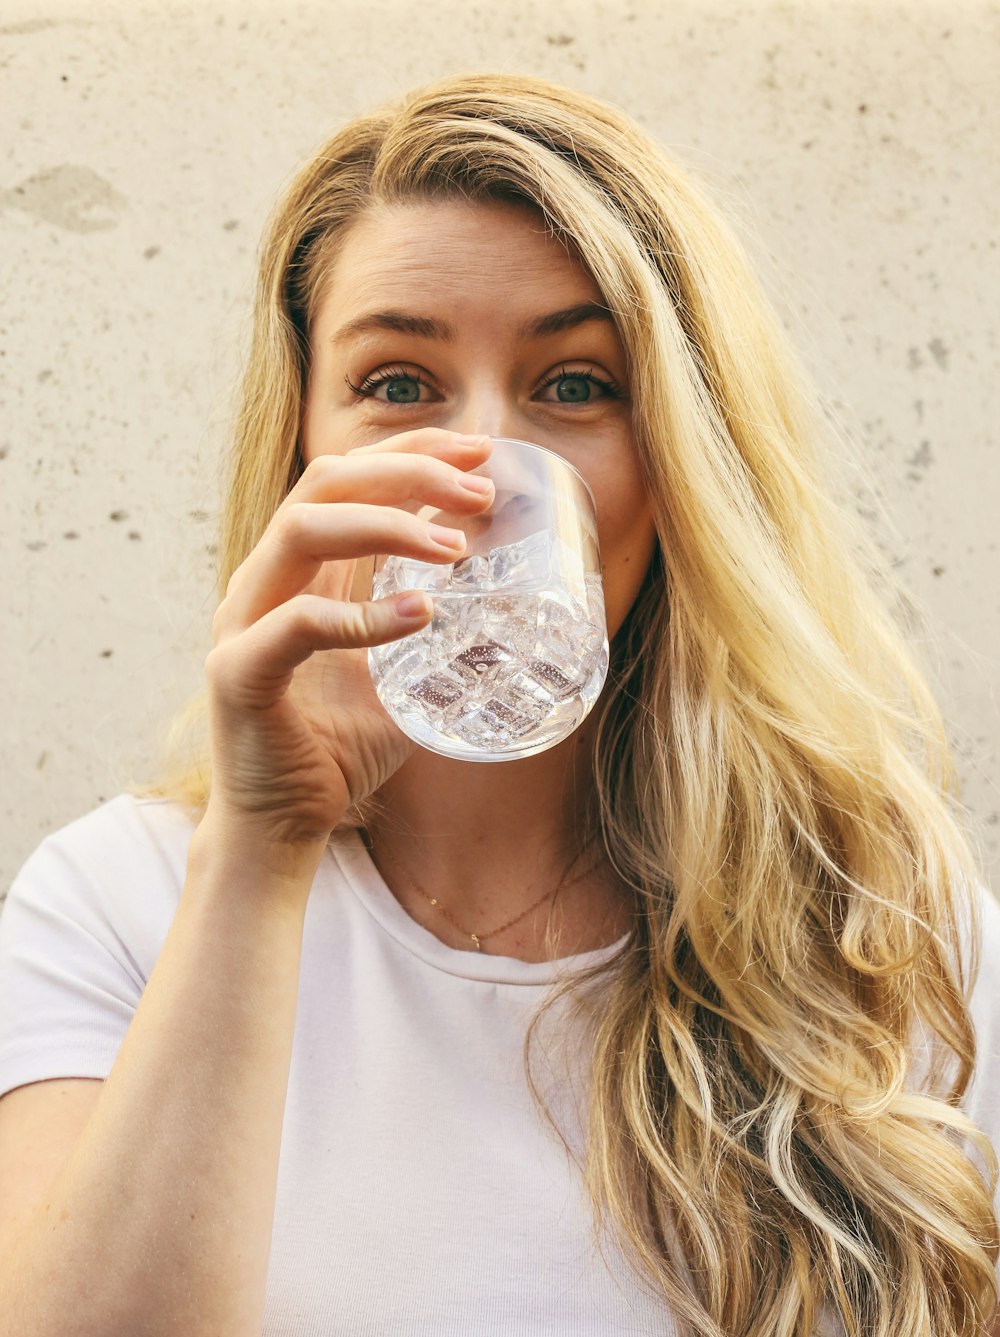 woman in white crew neck shirt drinking water